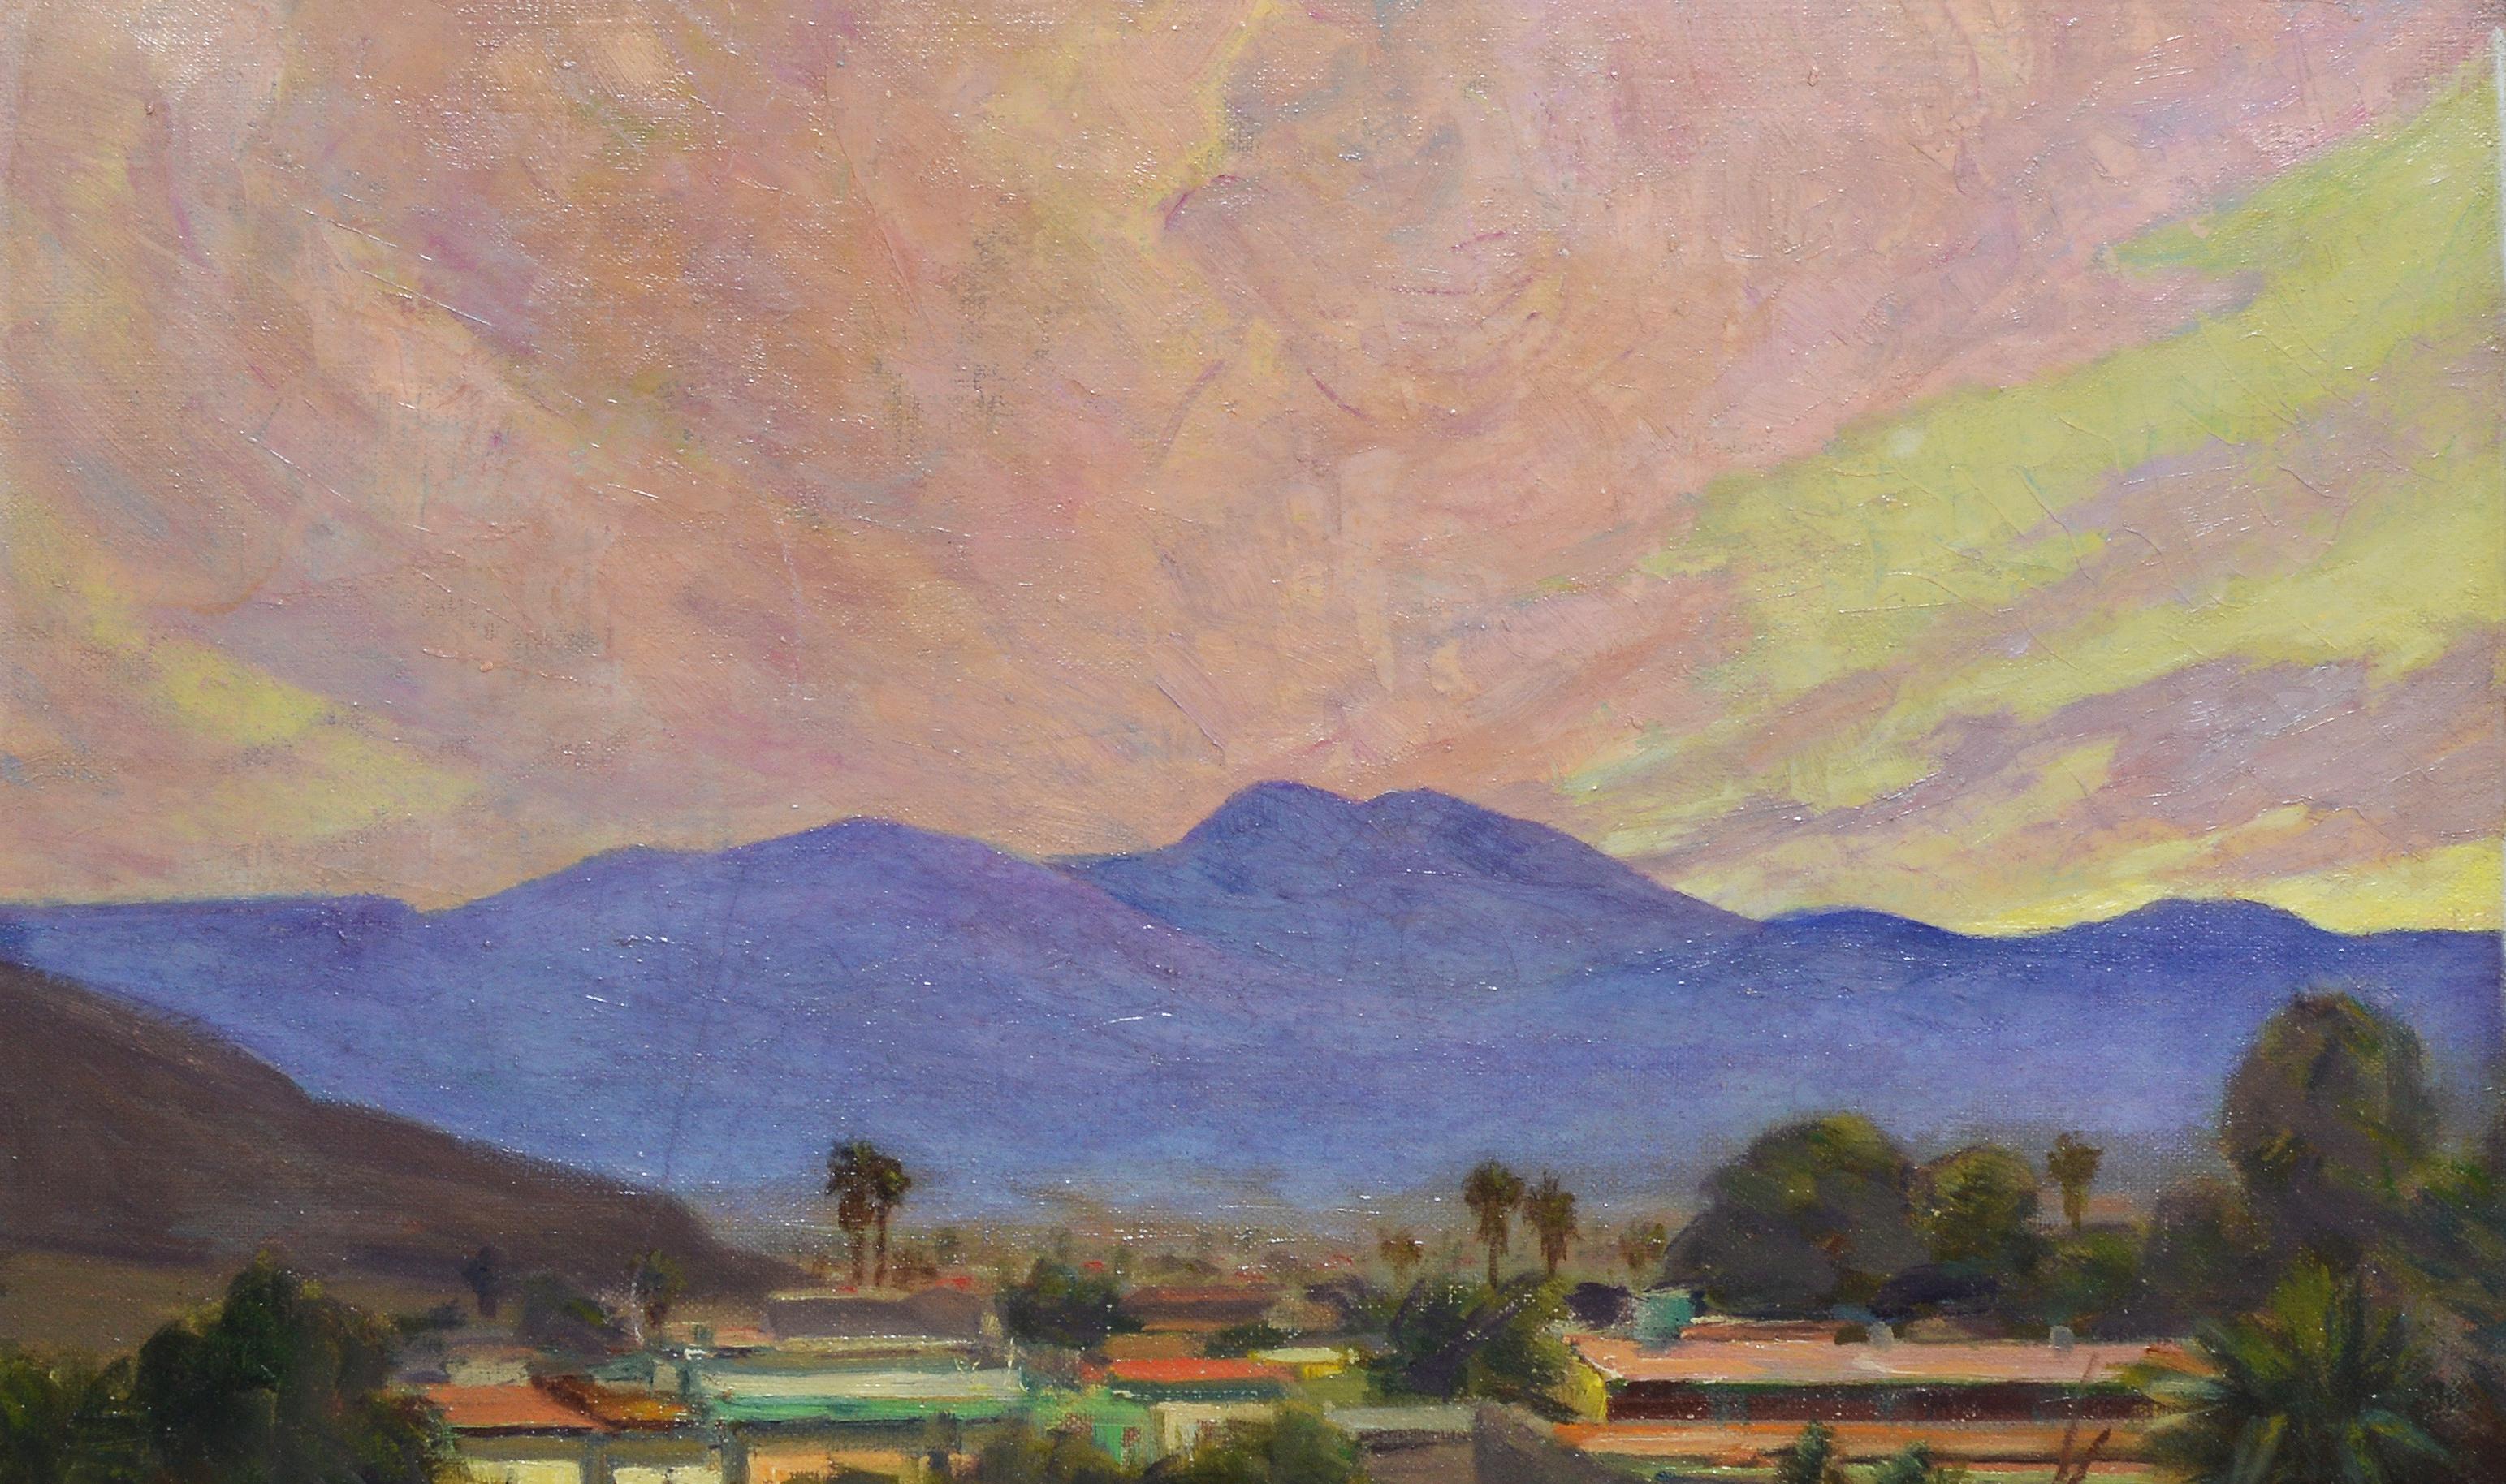 Antique impressionist oil painting of a California sunset by Axel Linus  (1885 - 1980).  Oil on canvas, circa 1940. Signed.  Displayed in a period giltwood frame.  Image, 16